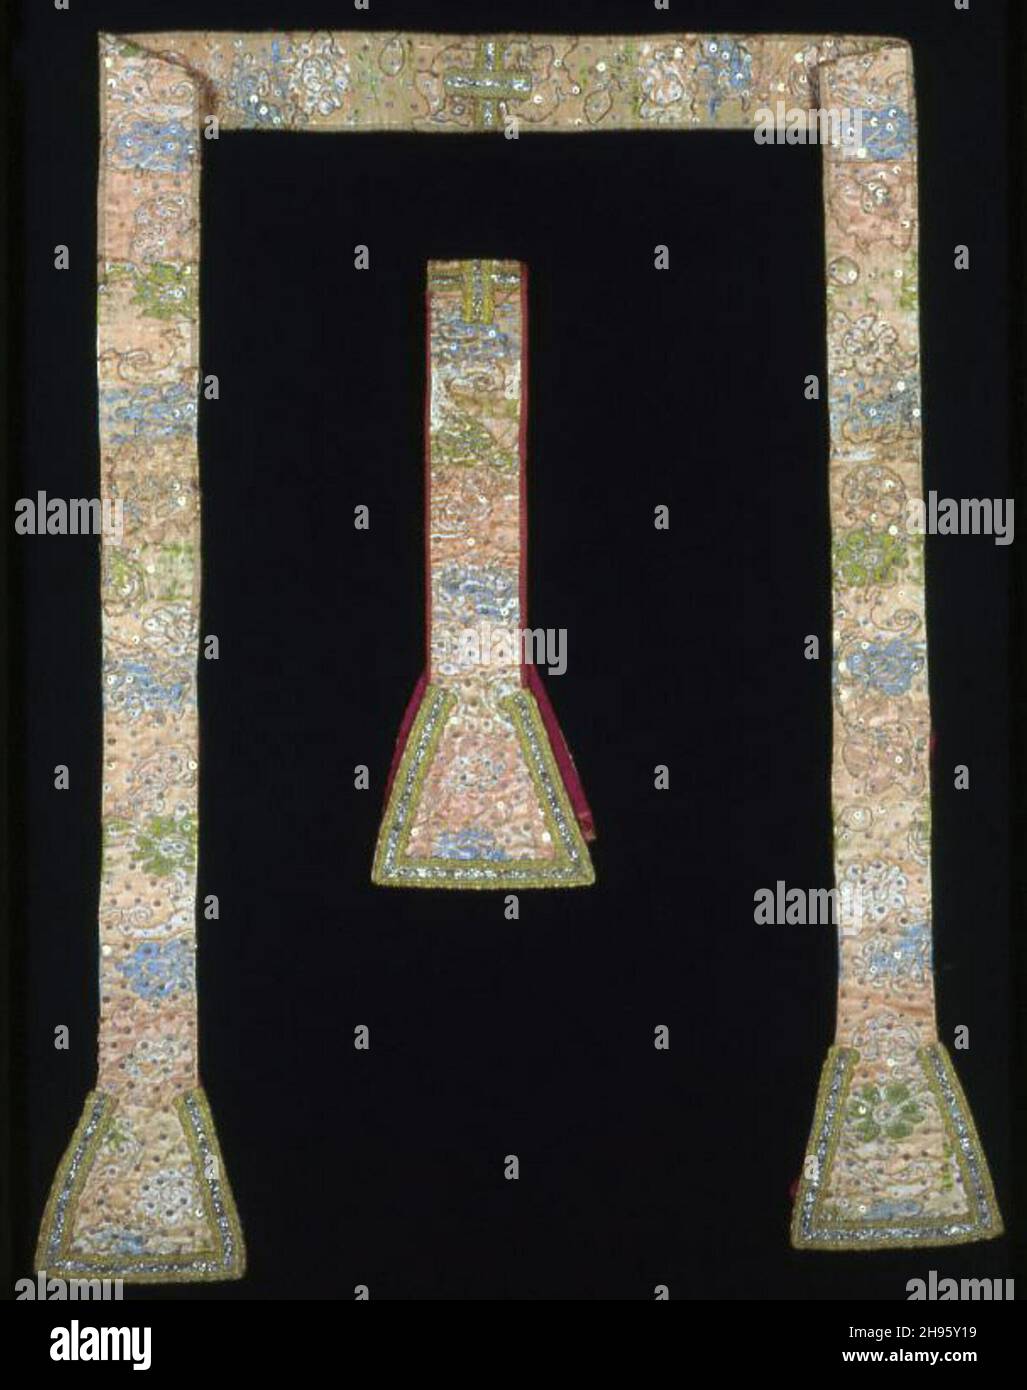 Stole, Maniple, Pair of Amice, Spain, Late 17th/early 18th century. Stock Photo